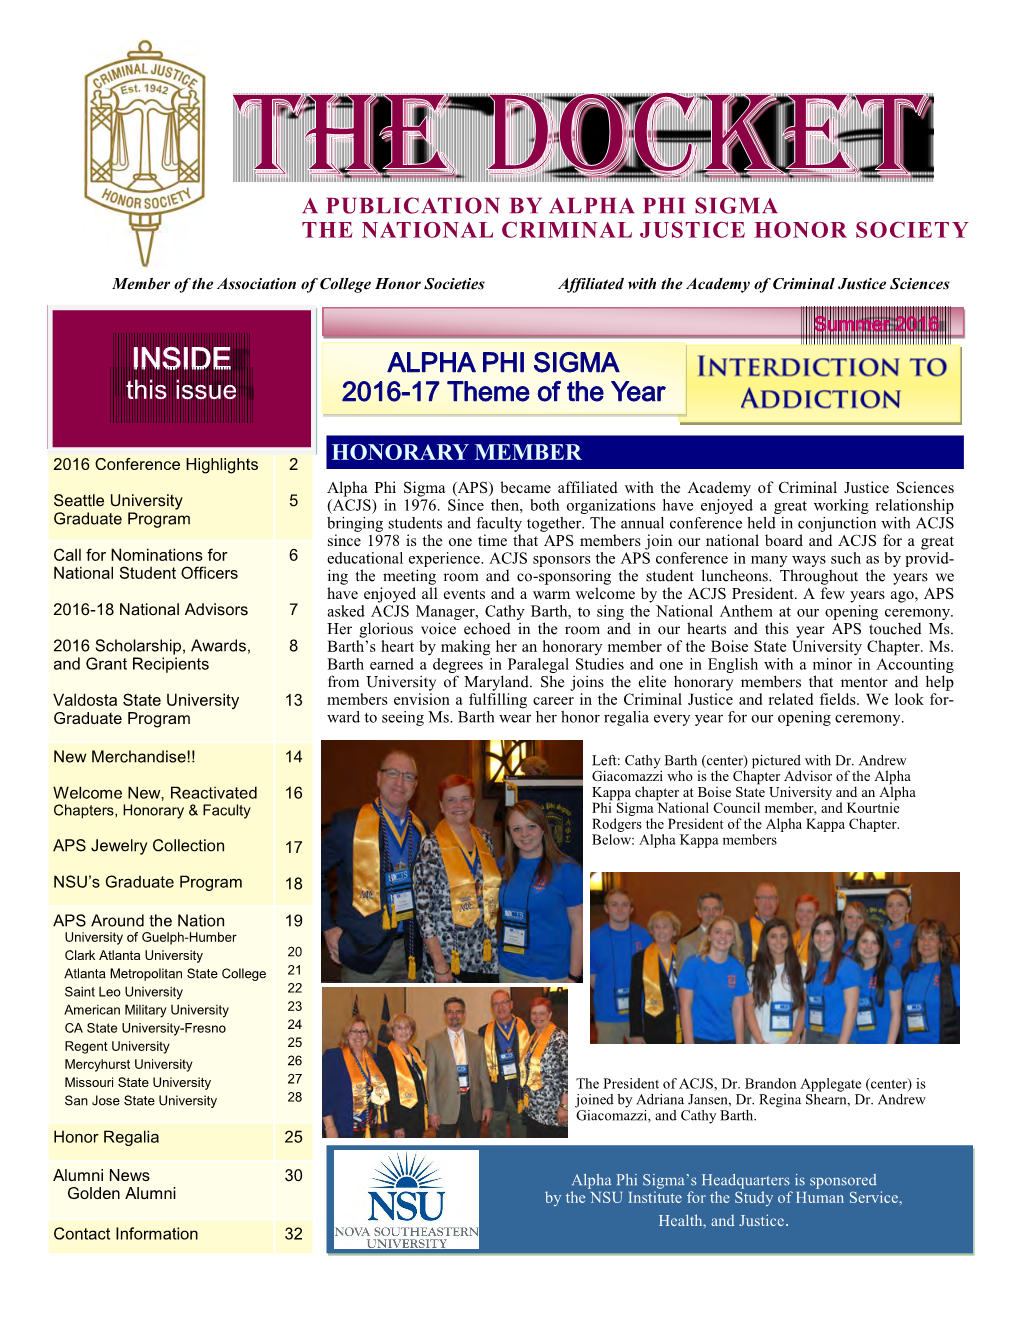 INSIDE ALPHA PHI SIGMA This Issue 2016-17 Theme of the Year